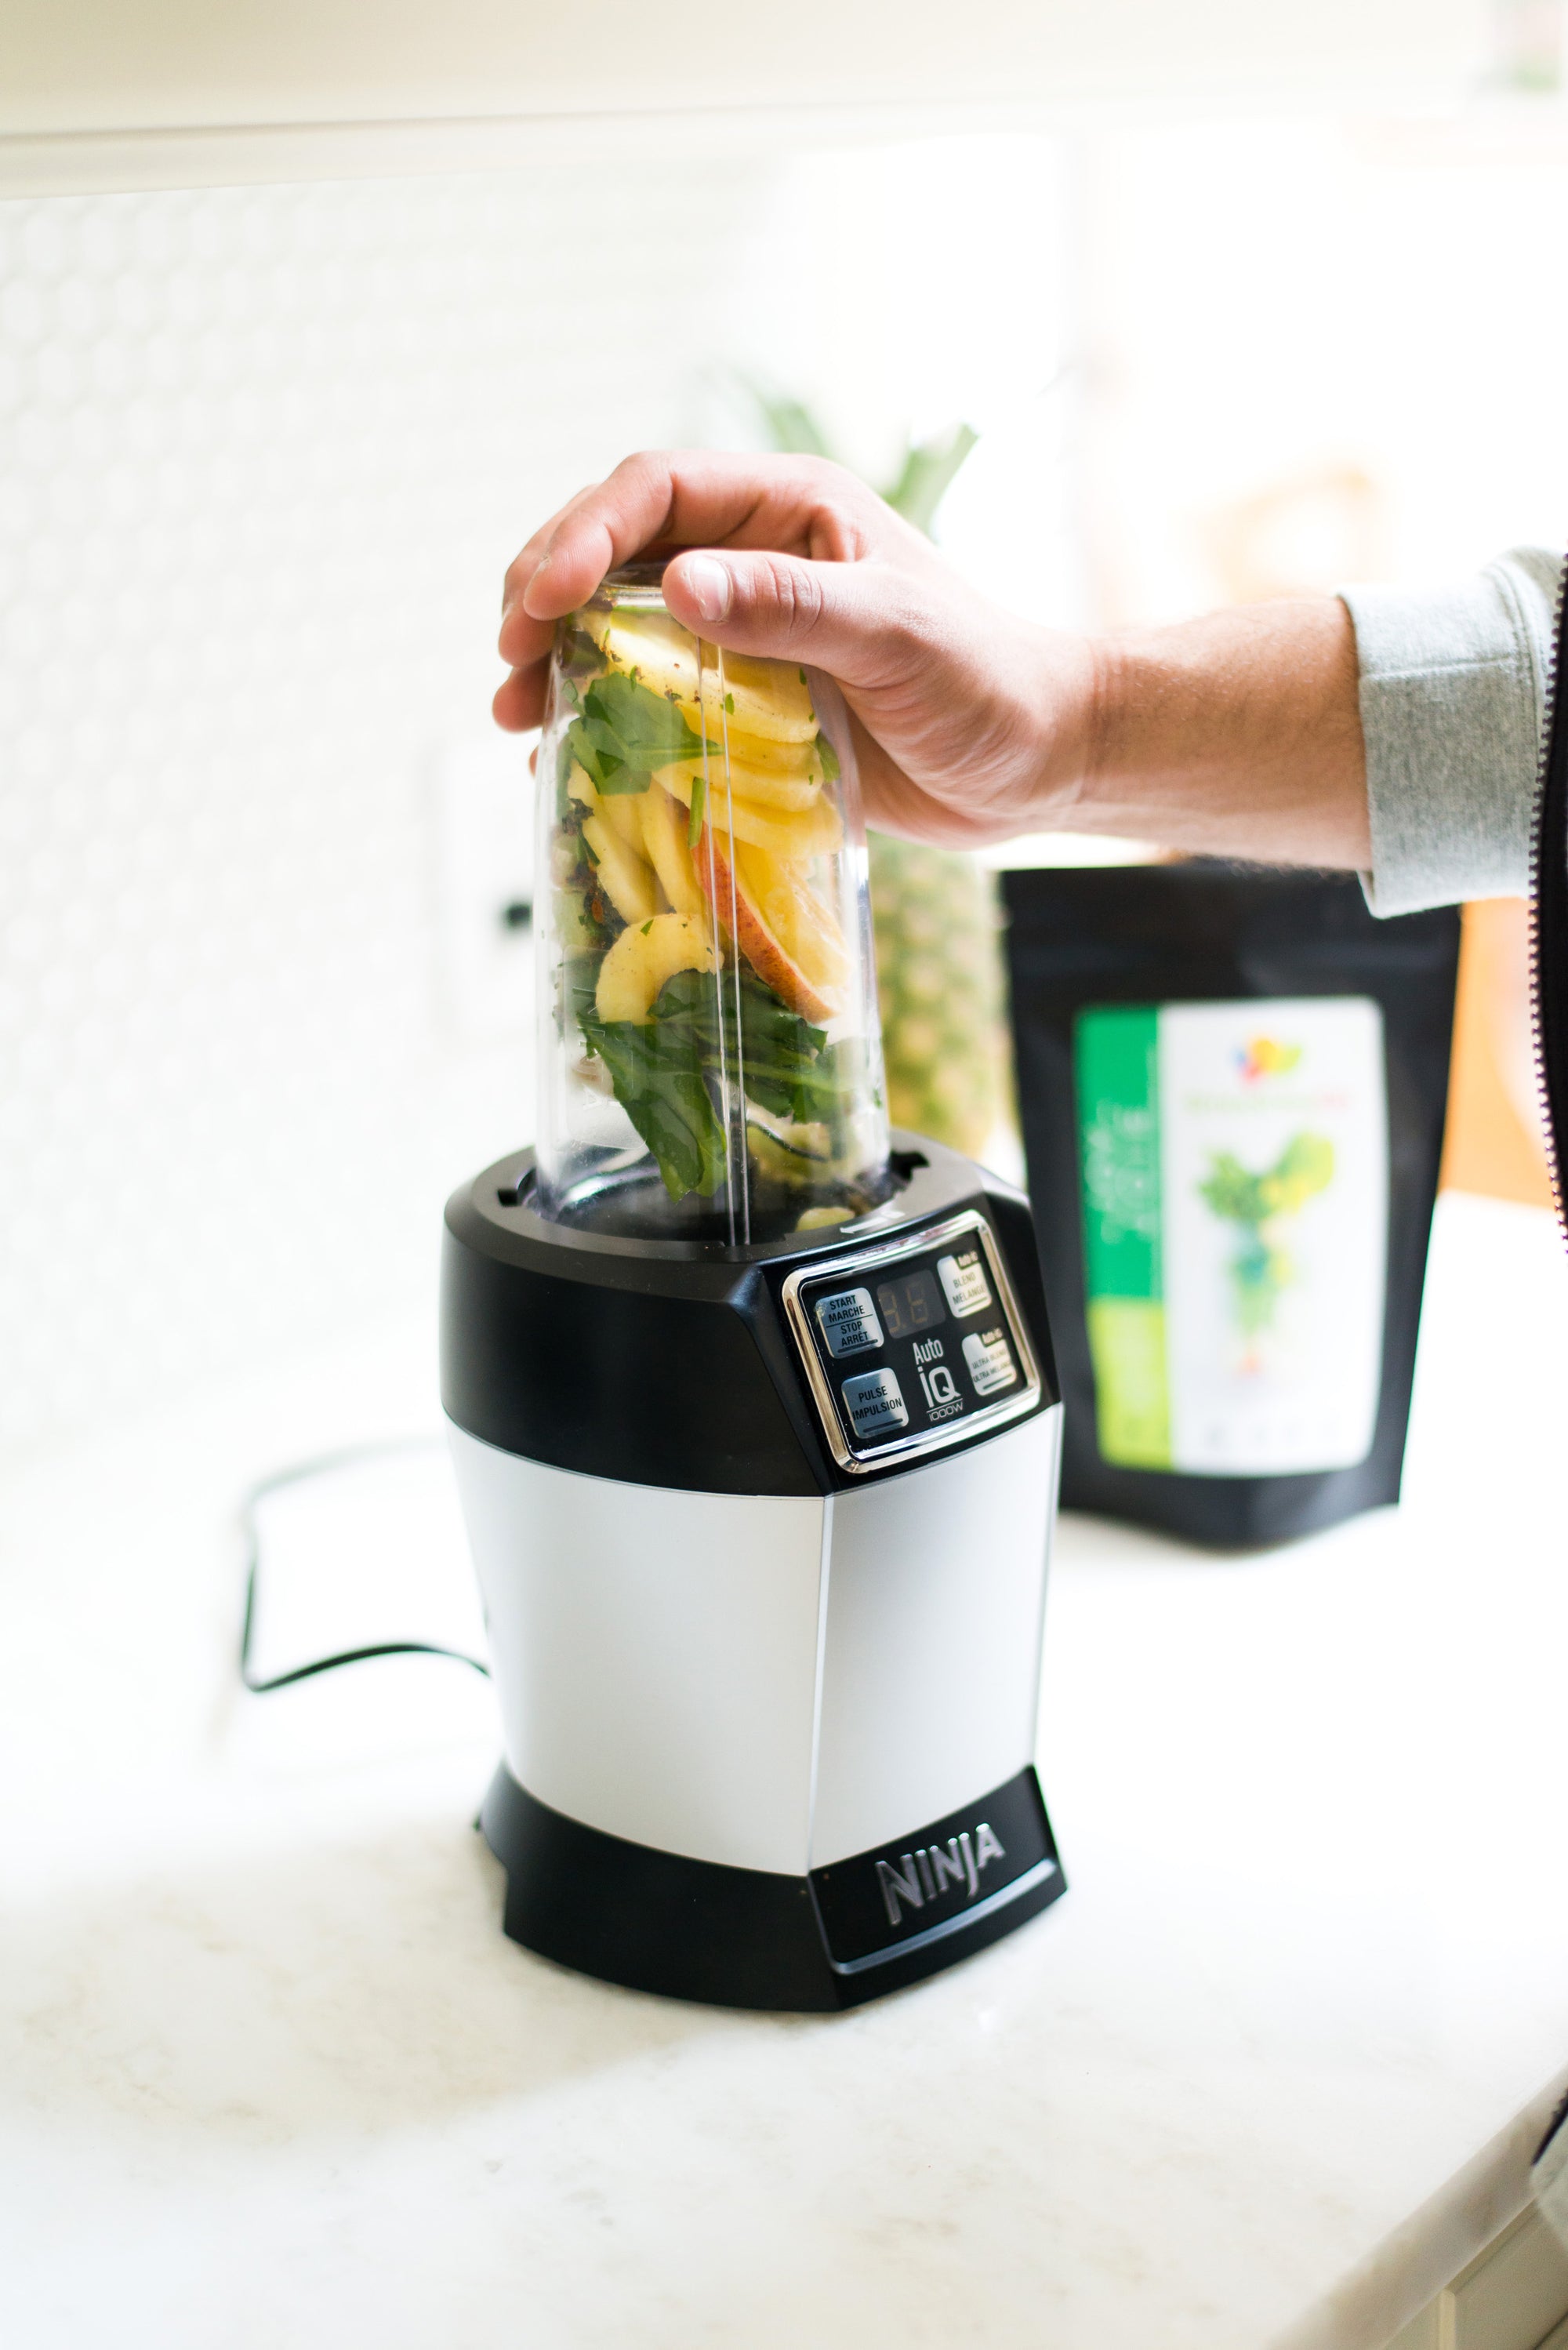 Why blending is better than juicing